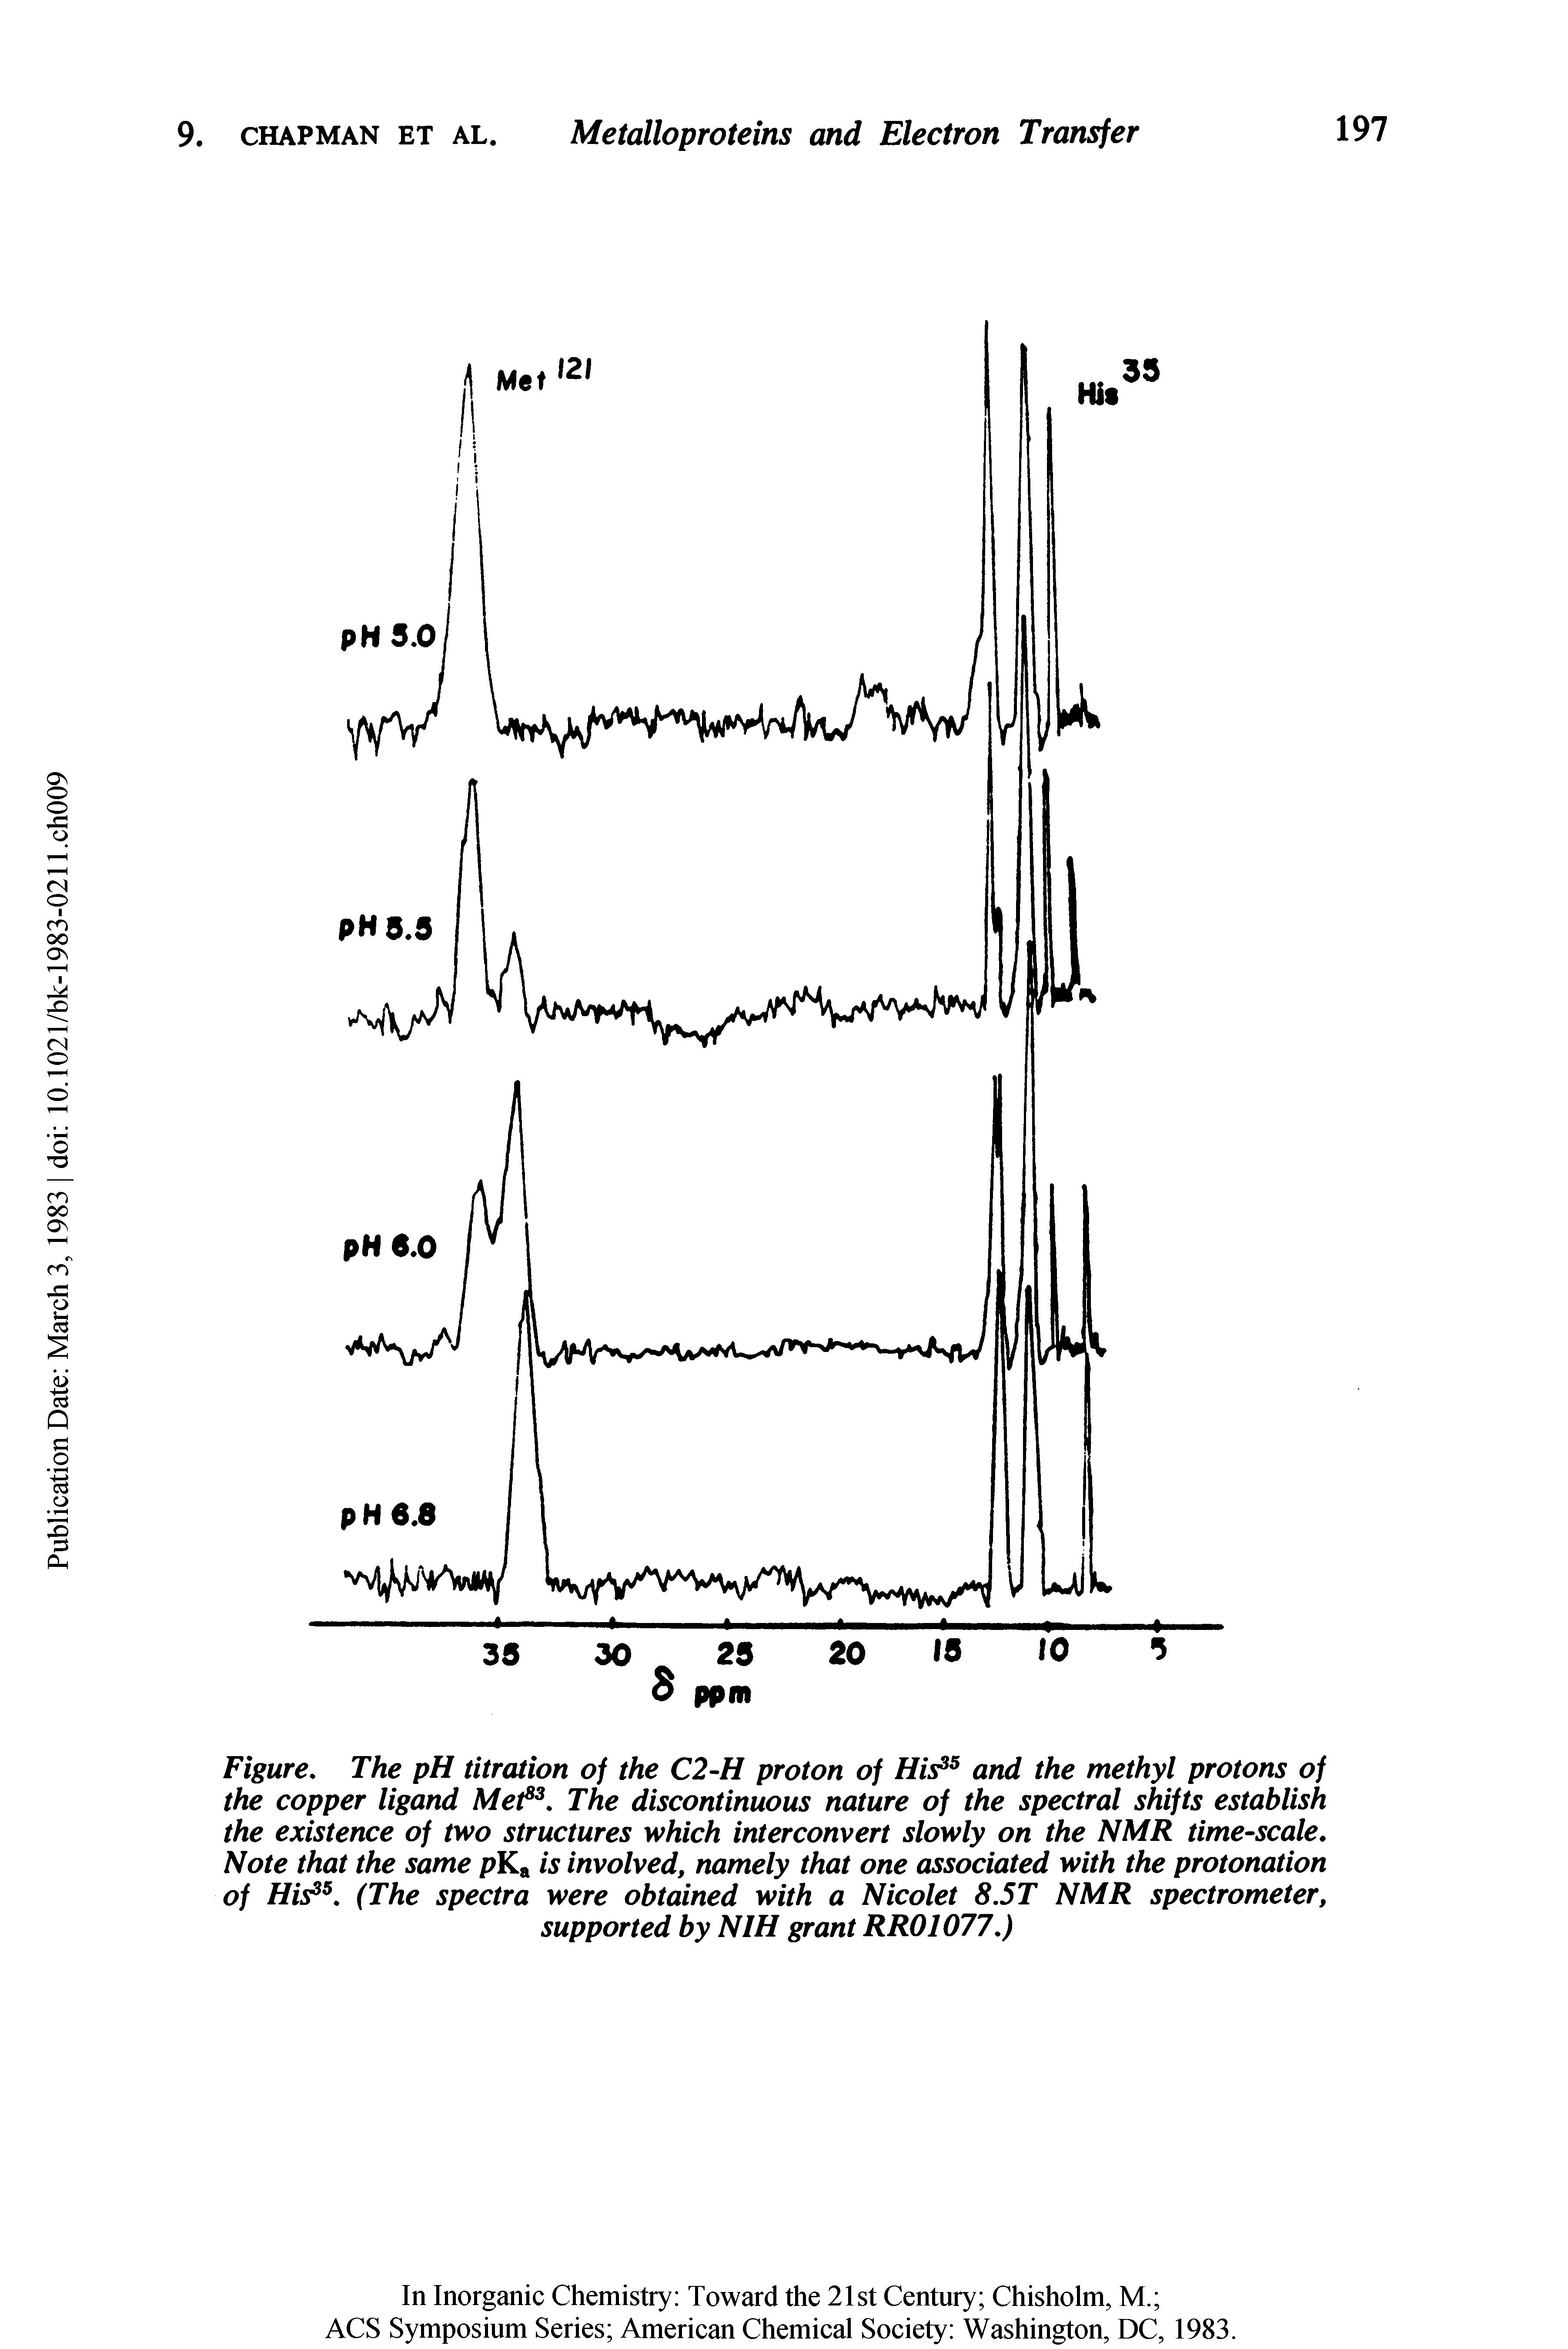 Figure. The pH titration of the C2-H proton of His35 and the methyl protons of the copper ligand Met83. The discontinuous nature of the spectral shifts establish the existence of two structures which interconvert slowly on the NMR time-scale. Note that the same pKa is involved, namely that one associated with the protonation of His35. (The spectra were obtained with a Nicolet 8.5T NMR spectrometer, supported by NIH grant RR01077.)...